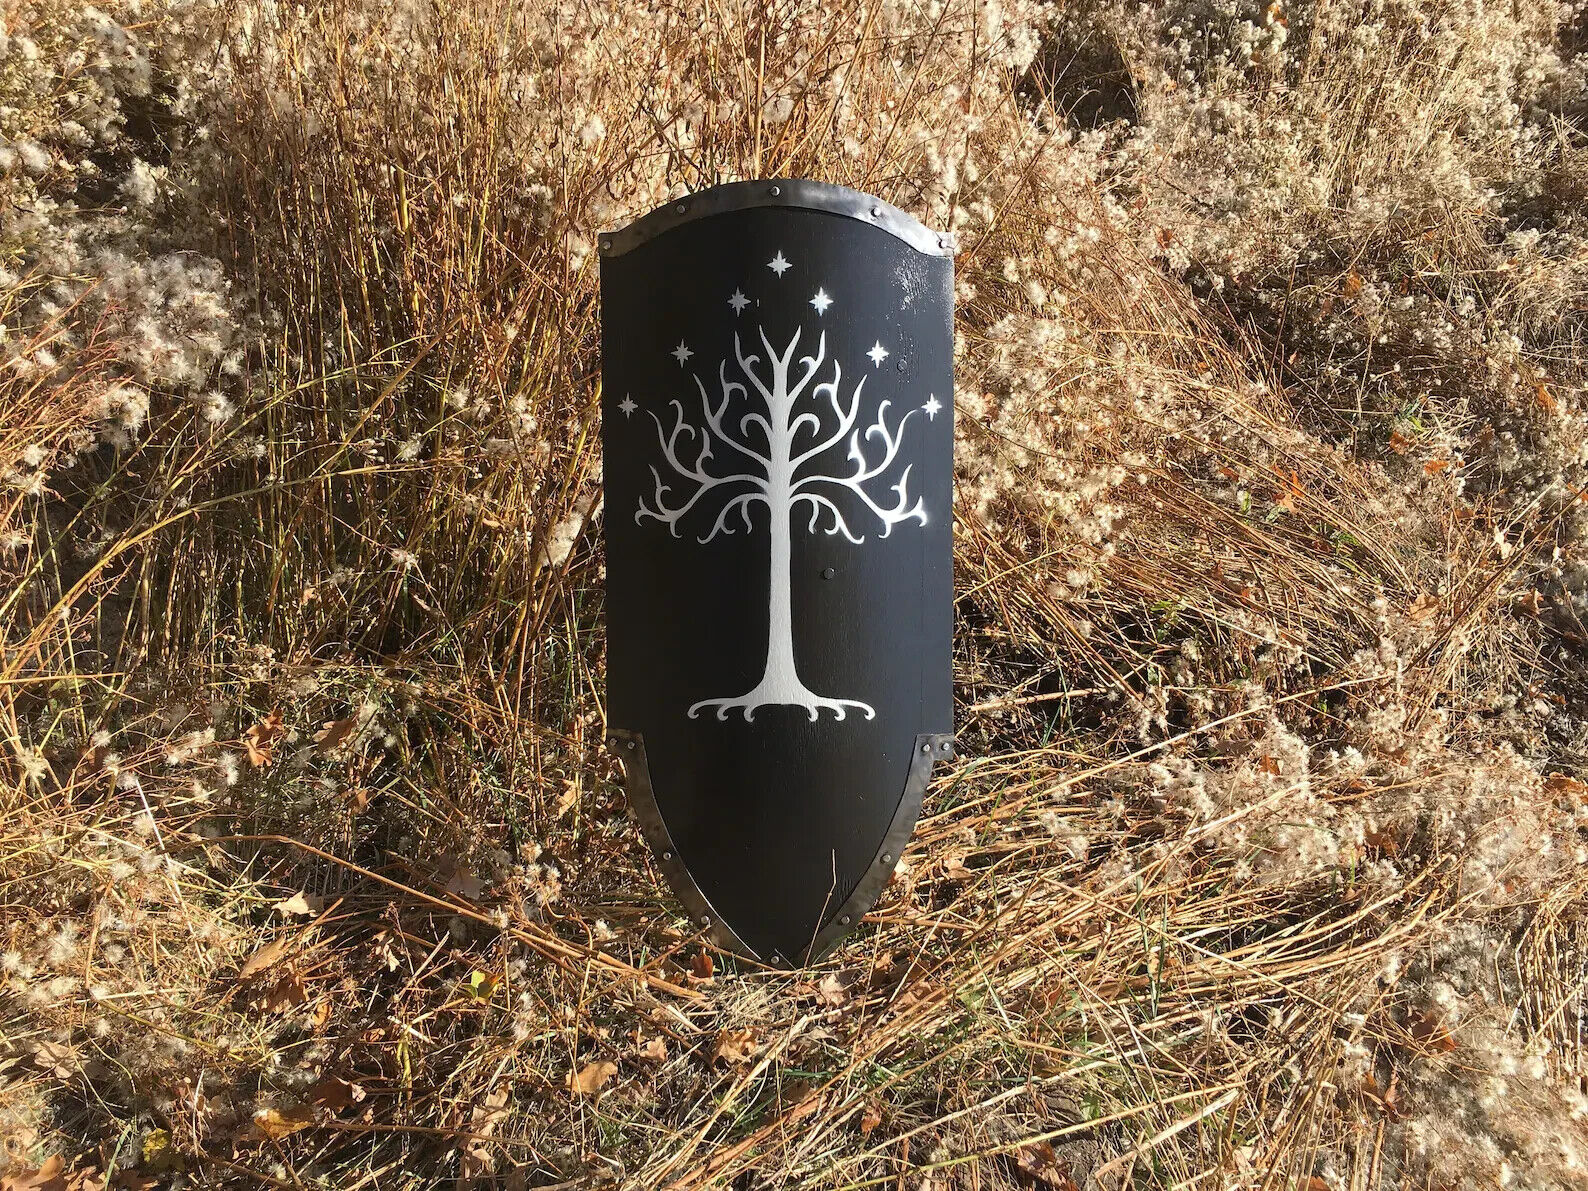 Lord of the Rings Shield of Gondor White Tree Wooden Carved Guardian Shield